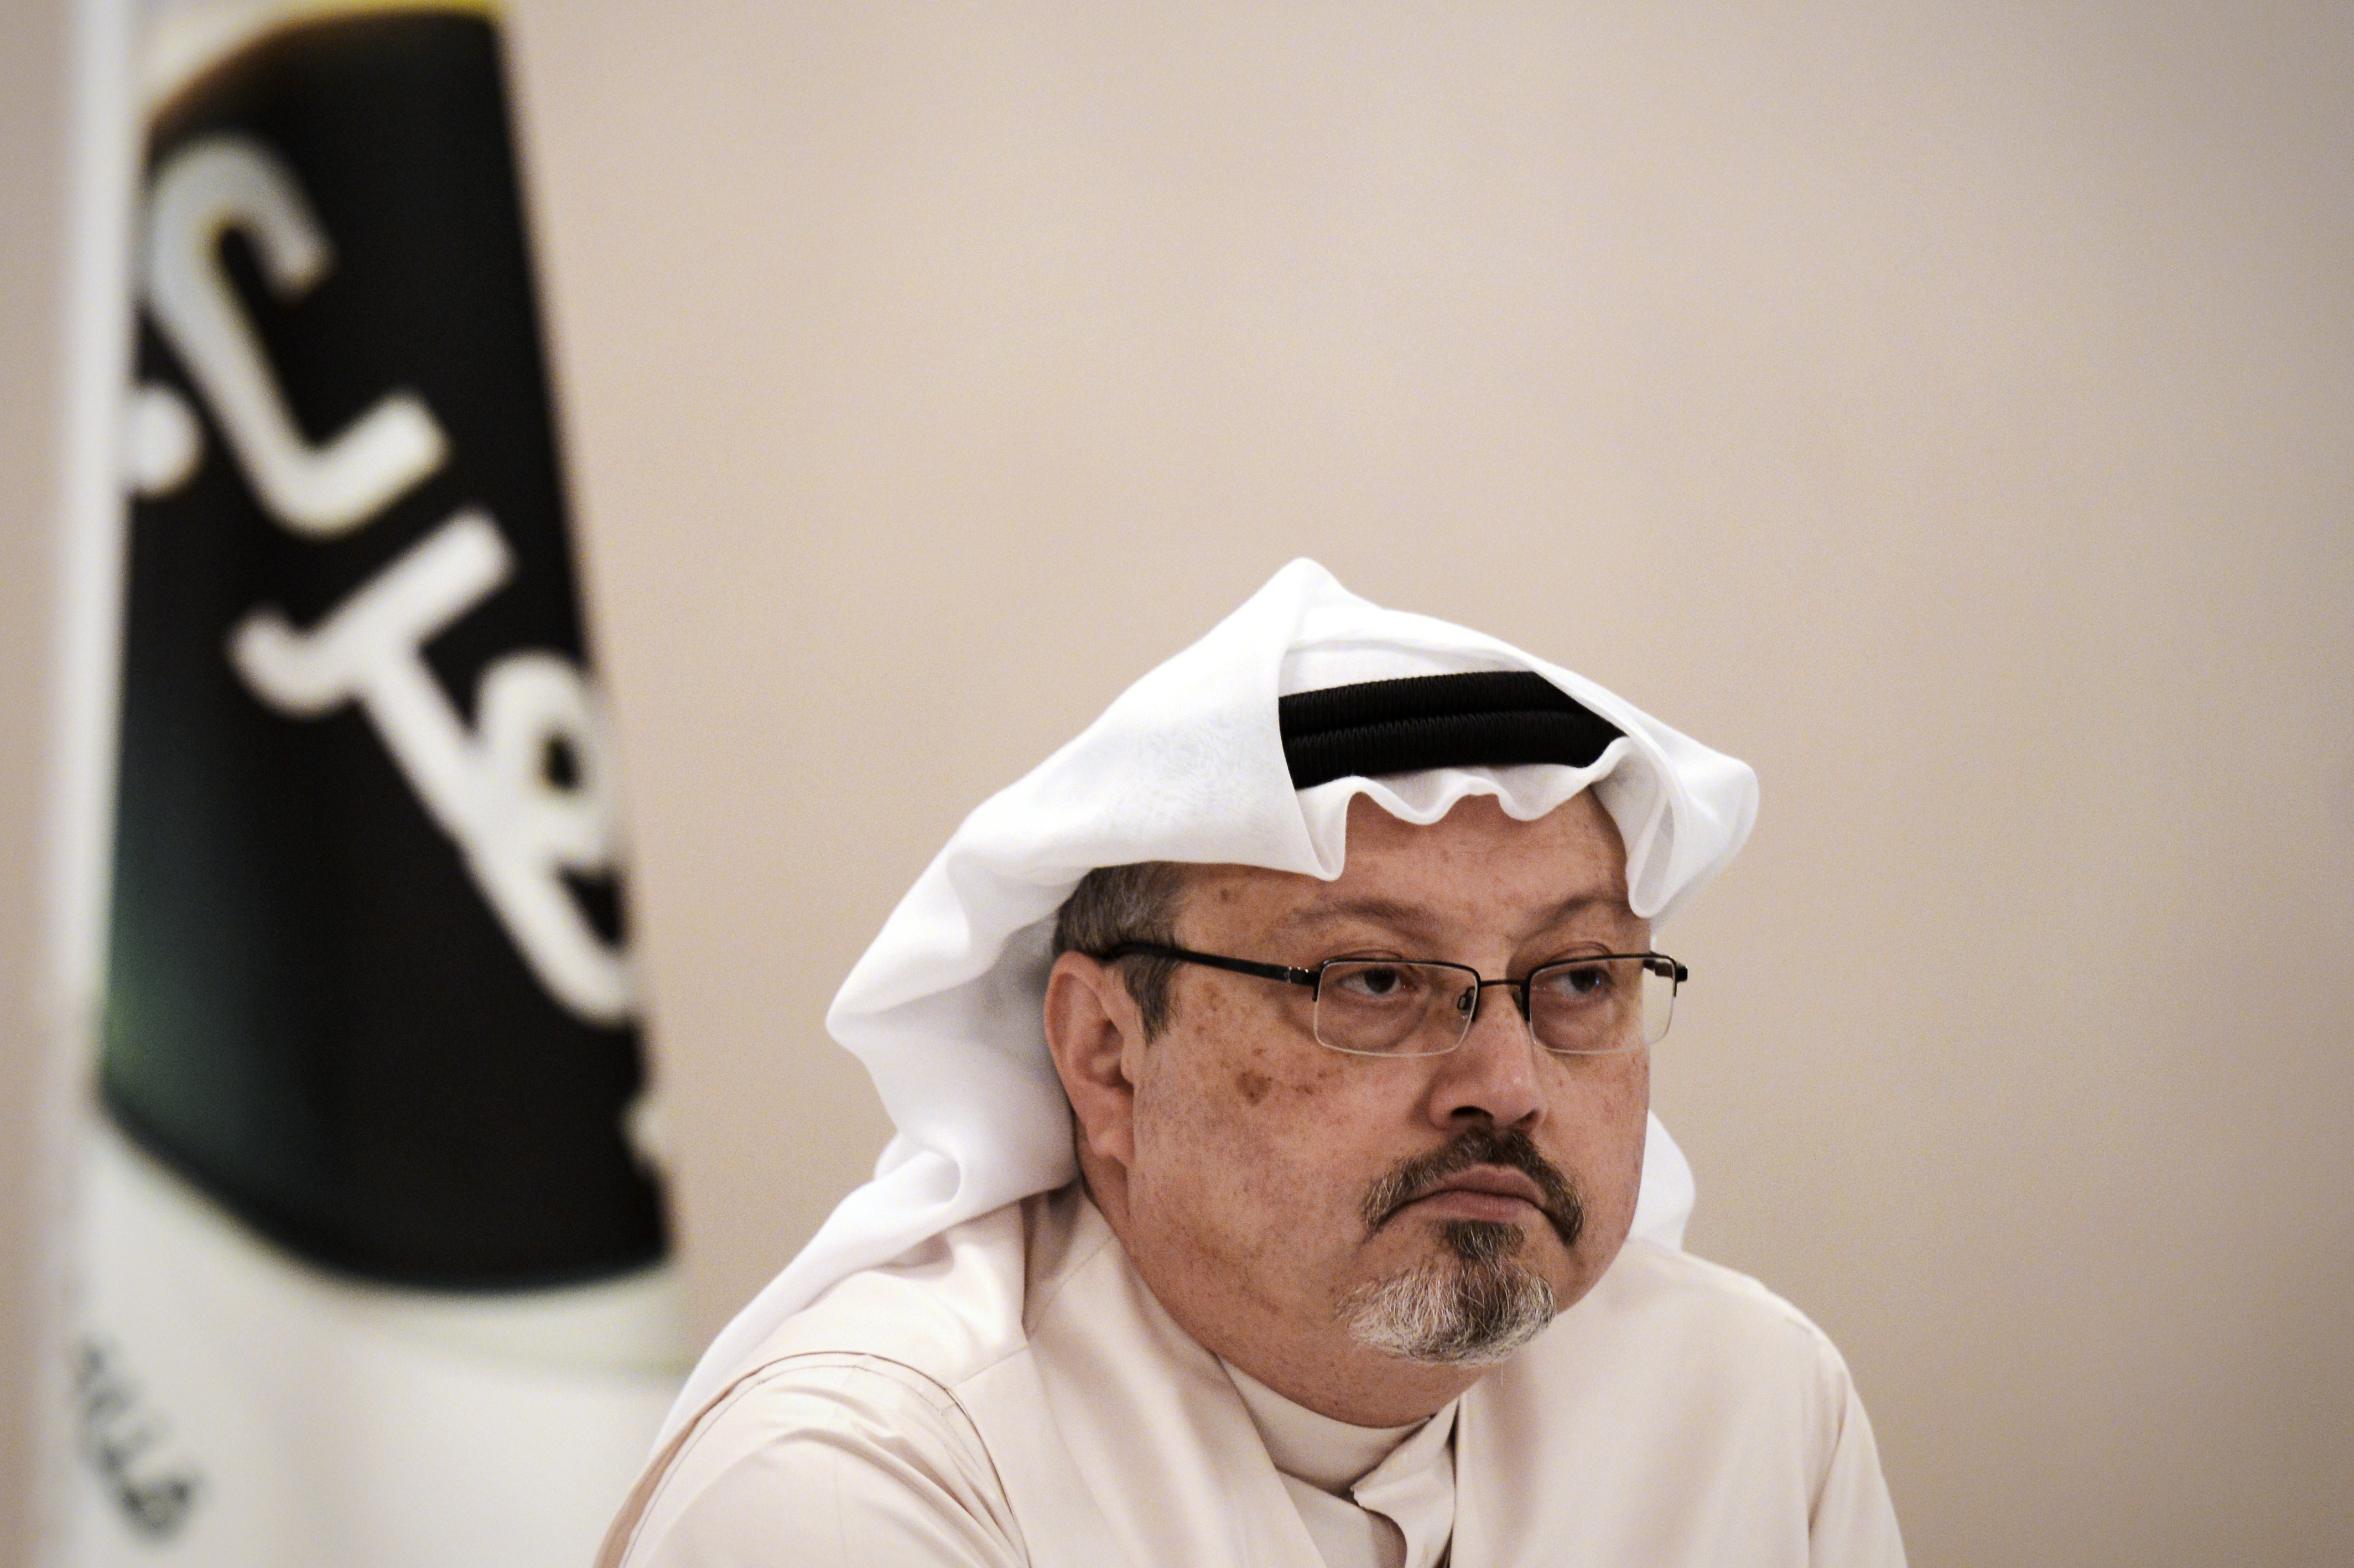 A general manager of Alarab TV, Jamal Khashoggi, looks on during a press conference in the Bahraini capital Manama, on December 15, 2014. The pan-Arab satellite news broadcaster owned by billionaire Saudi businessman Alwaleed bin Talal will go on air February 1, promising to "break the mould" in a crowded field.AFP PHOTO/ MOHAMMED AL-SHAIKH (Photo credit should read MOHAMMED AL-SHAIKH/AFP/Getty Images)